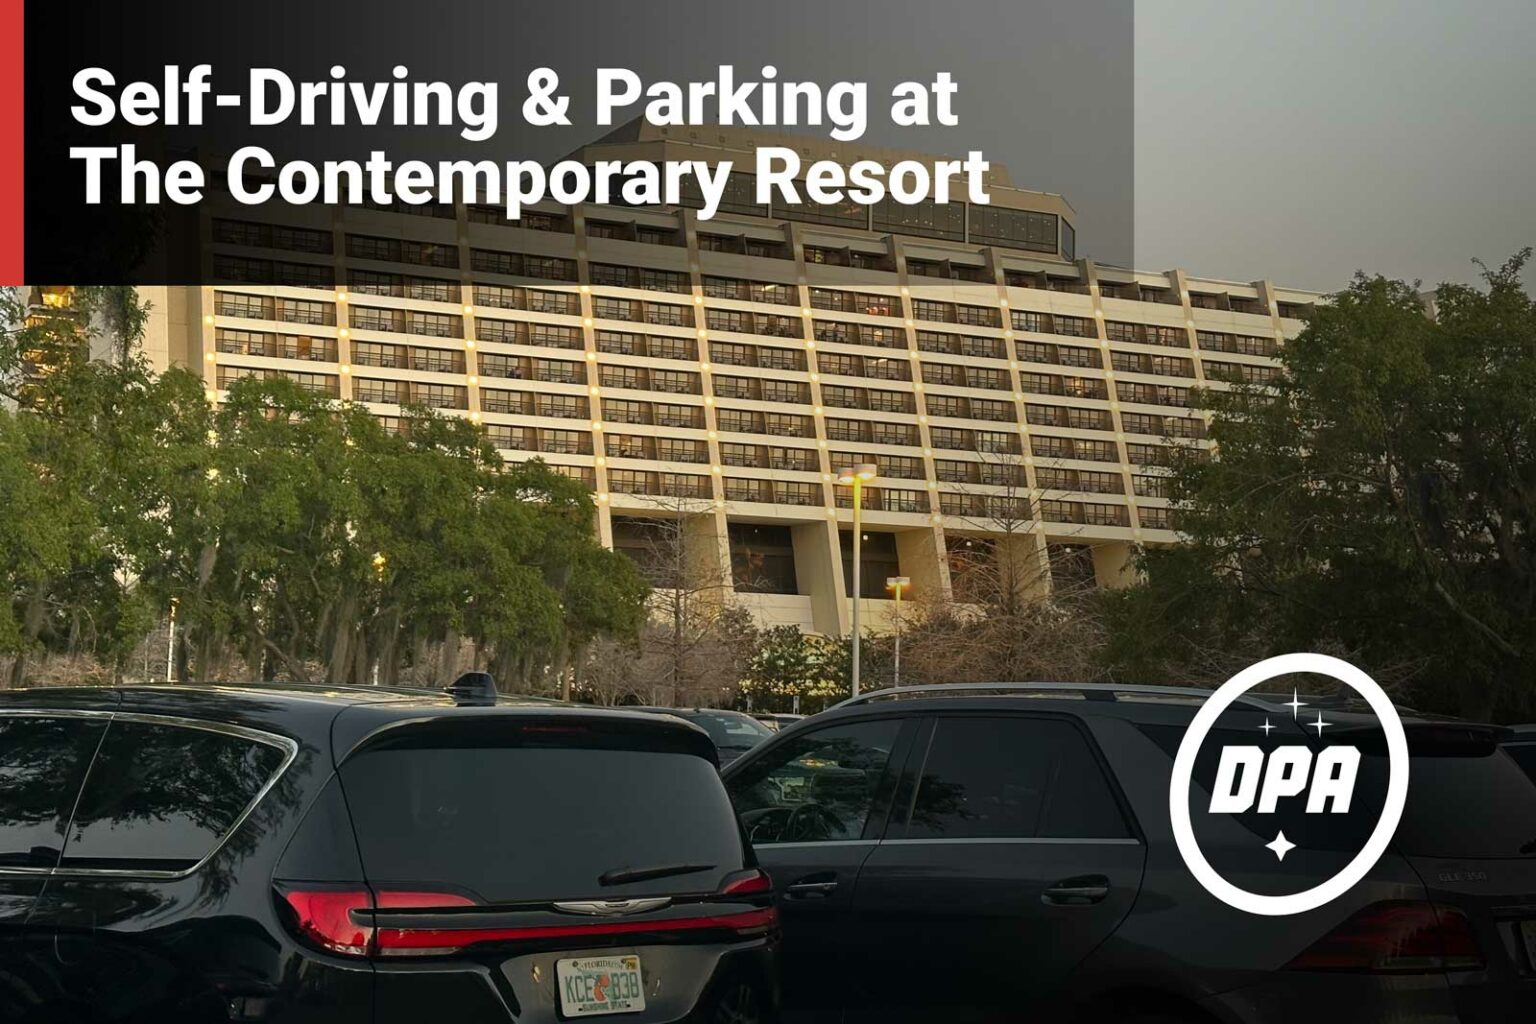 Self-Driving & Parking atThe Contemporary Resort